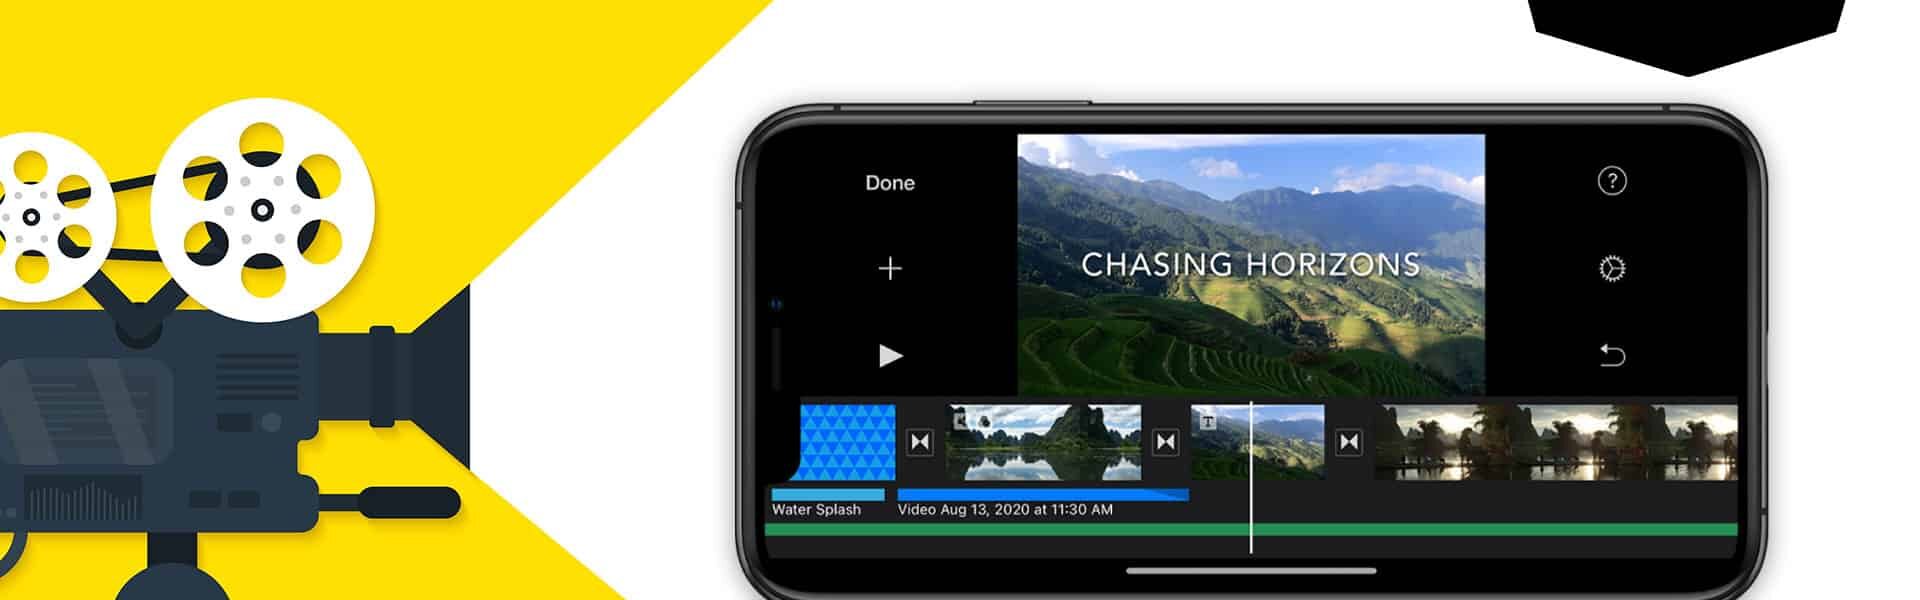 iphone apps for filmmakers editing